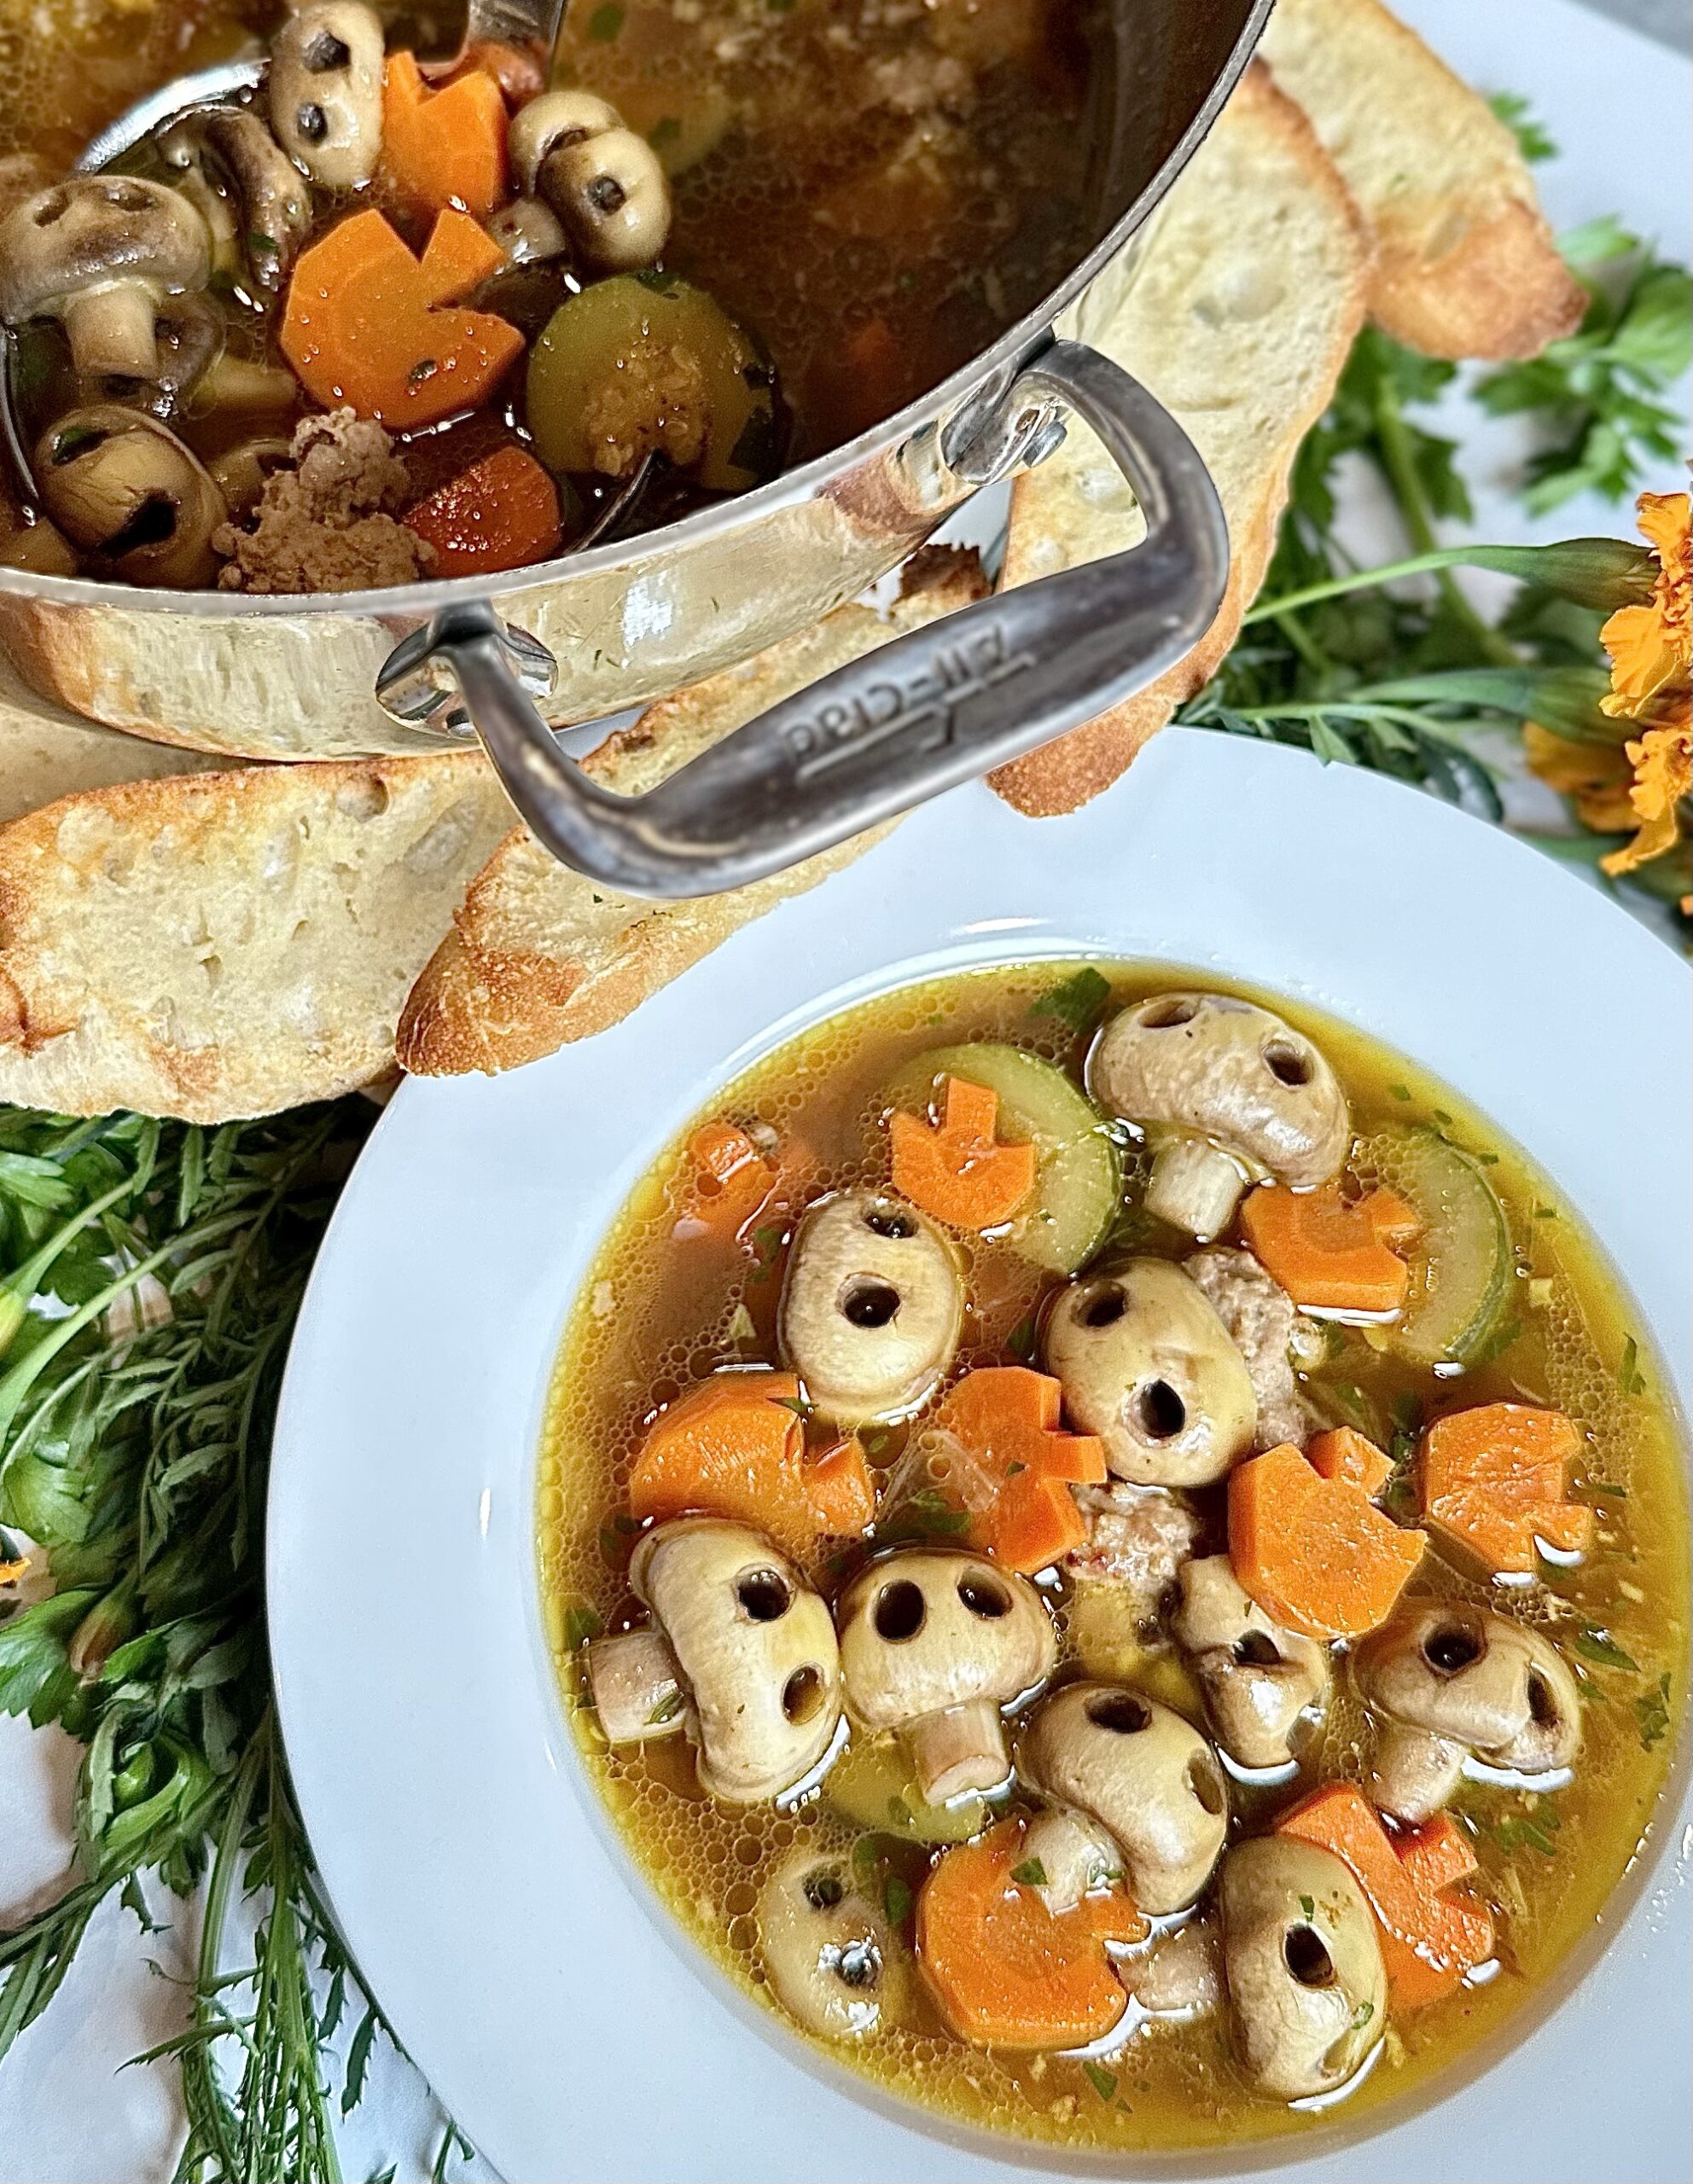 Spooky Sausage Soup with mushroom skulls in an all clad Dutch oven served in a white rimmed soup bowl arnished with herbs carrots that look like pumpkins